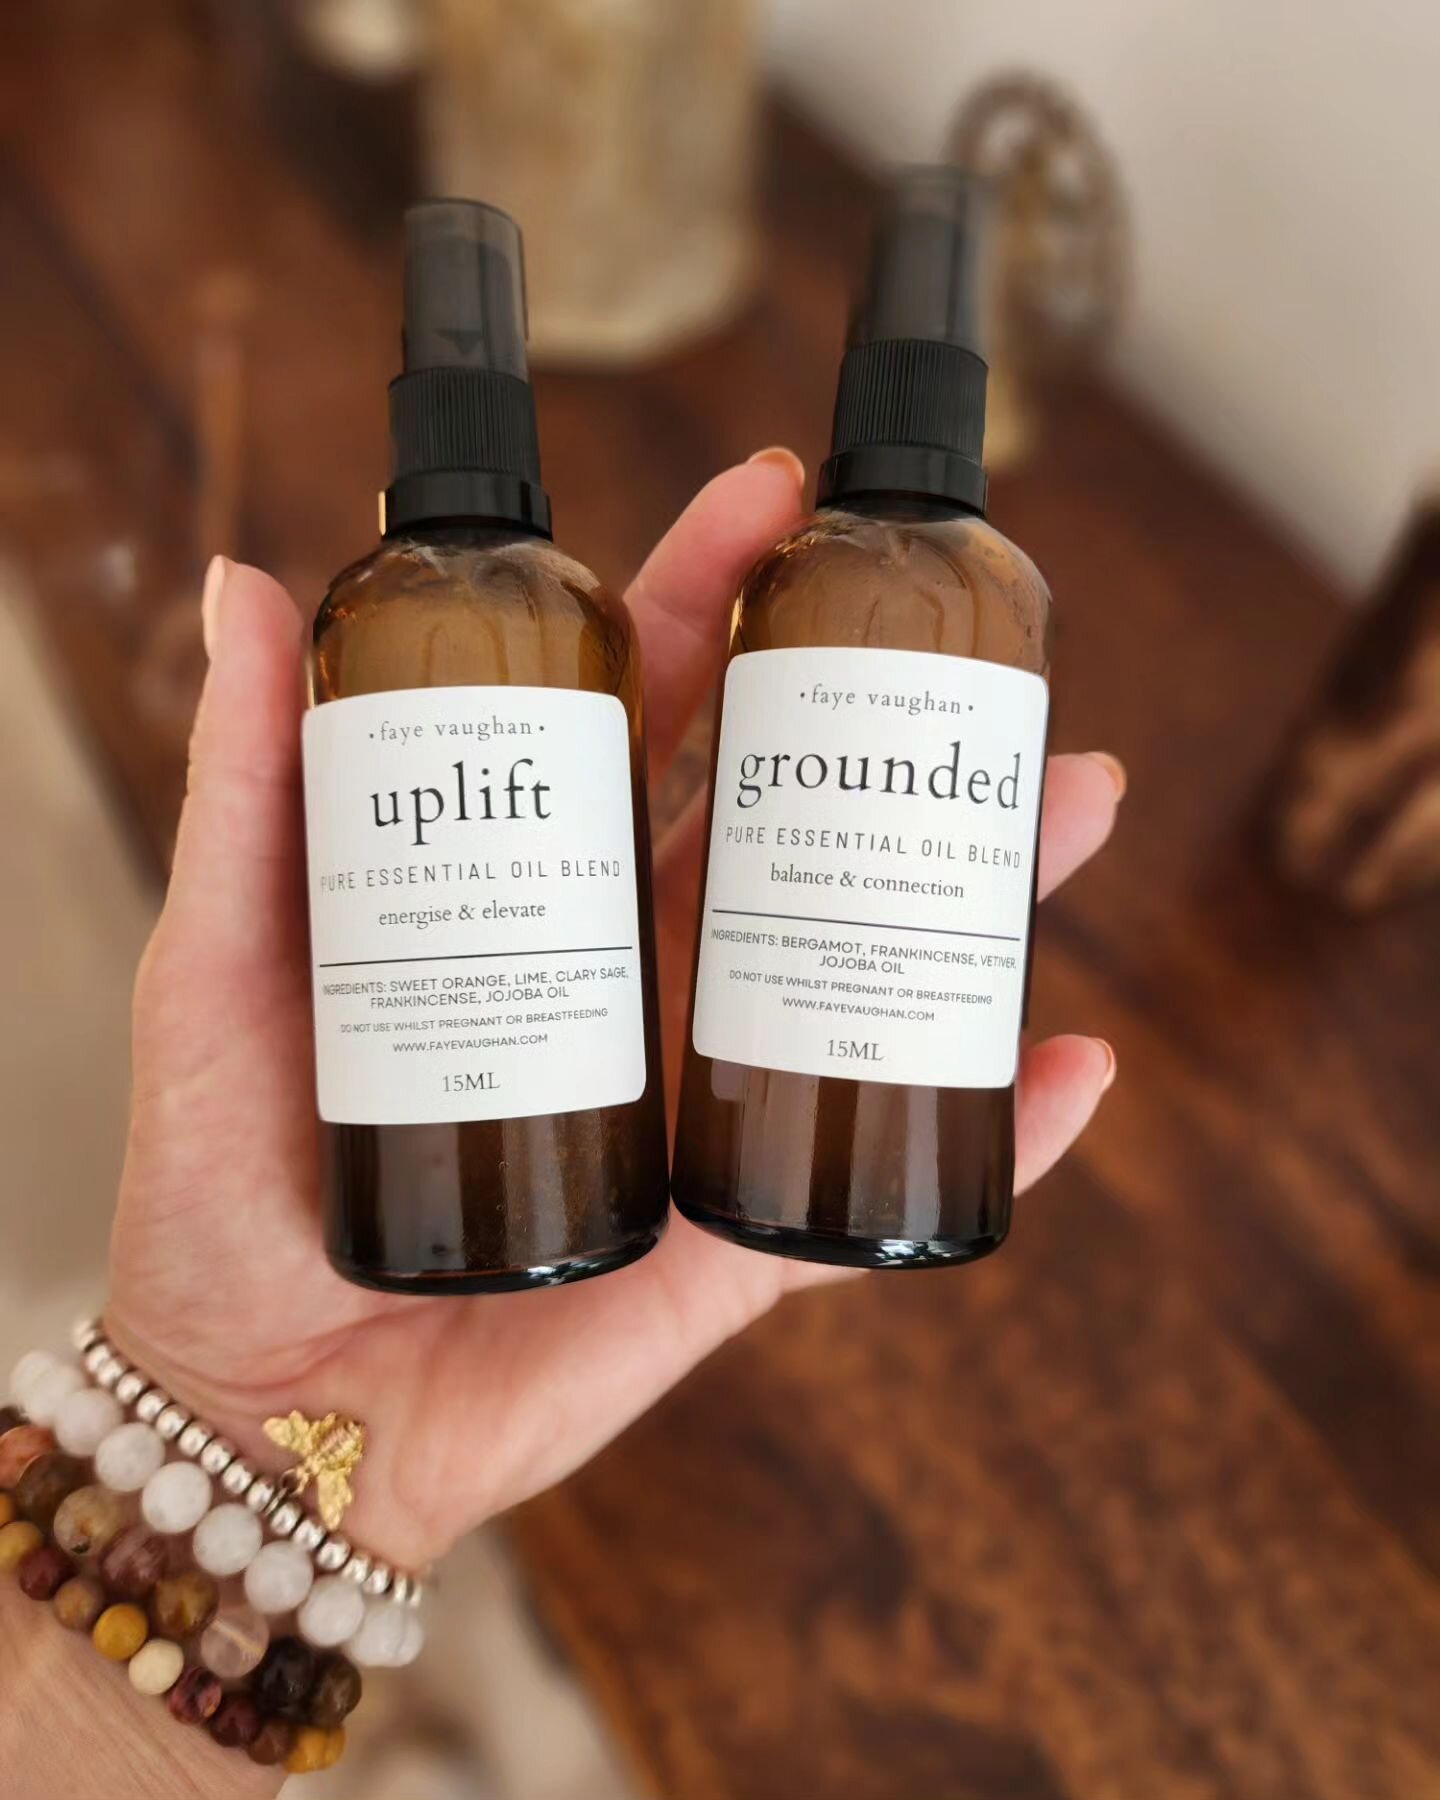 Welcoming these potent essential oils to accompany our &quot;Signature Sounds&quot; Infusing the healing vibration of these exquisite plant extracts and our unique frequency floor. 

It's the perfect combination to relax and rejuvenate while receivin